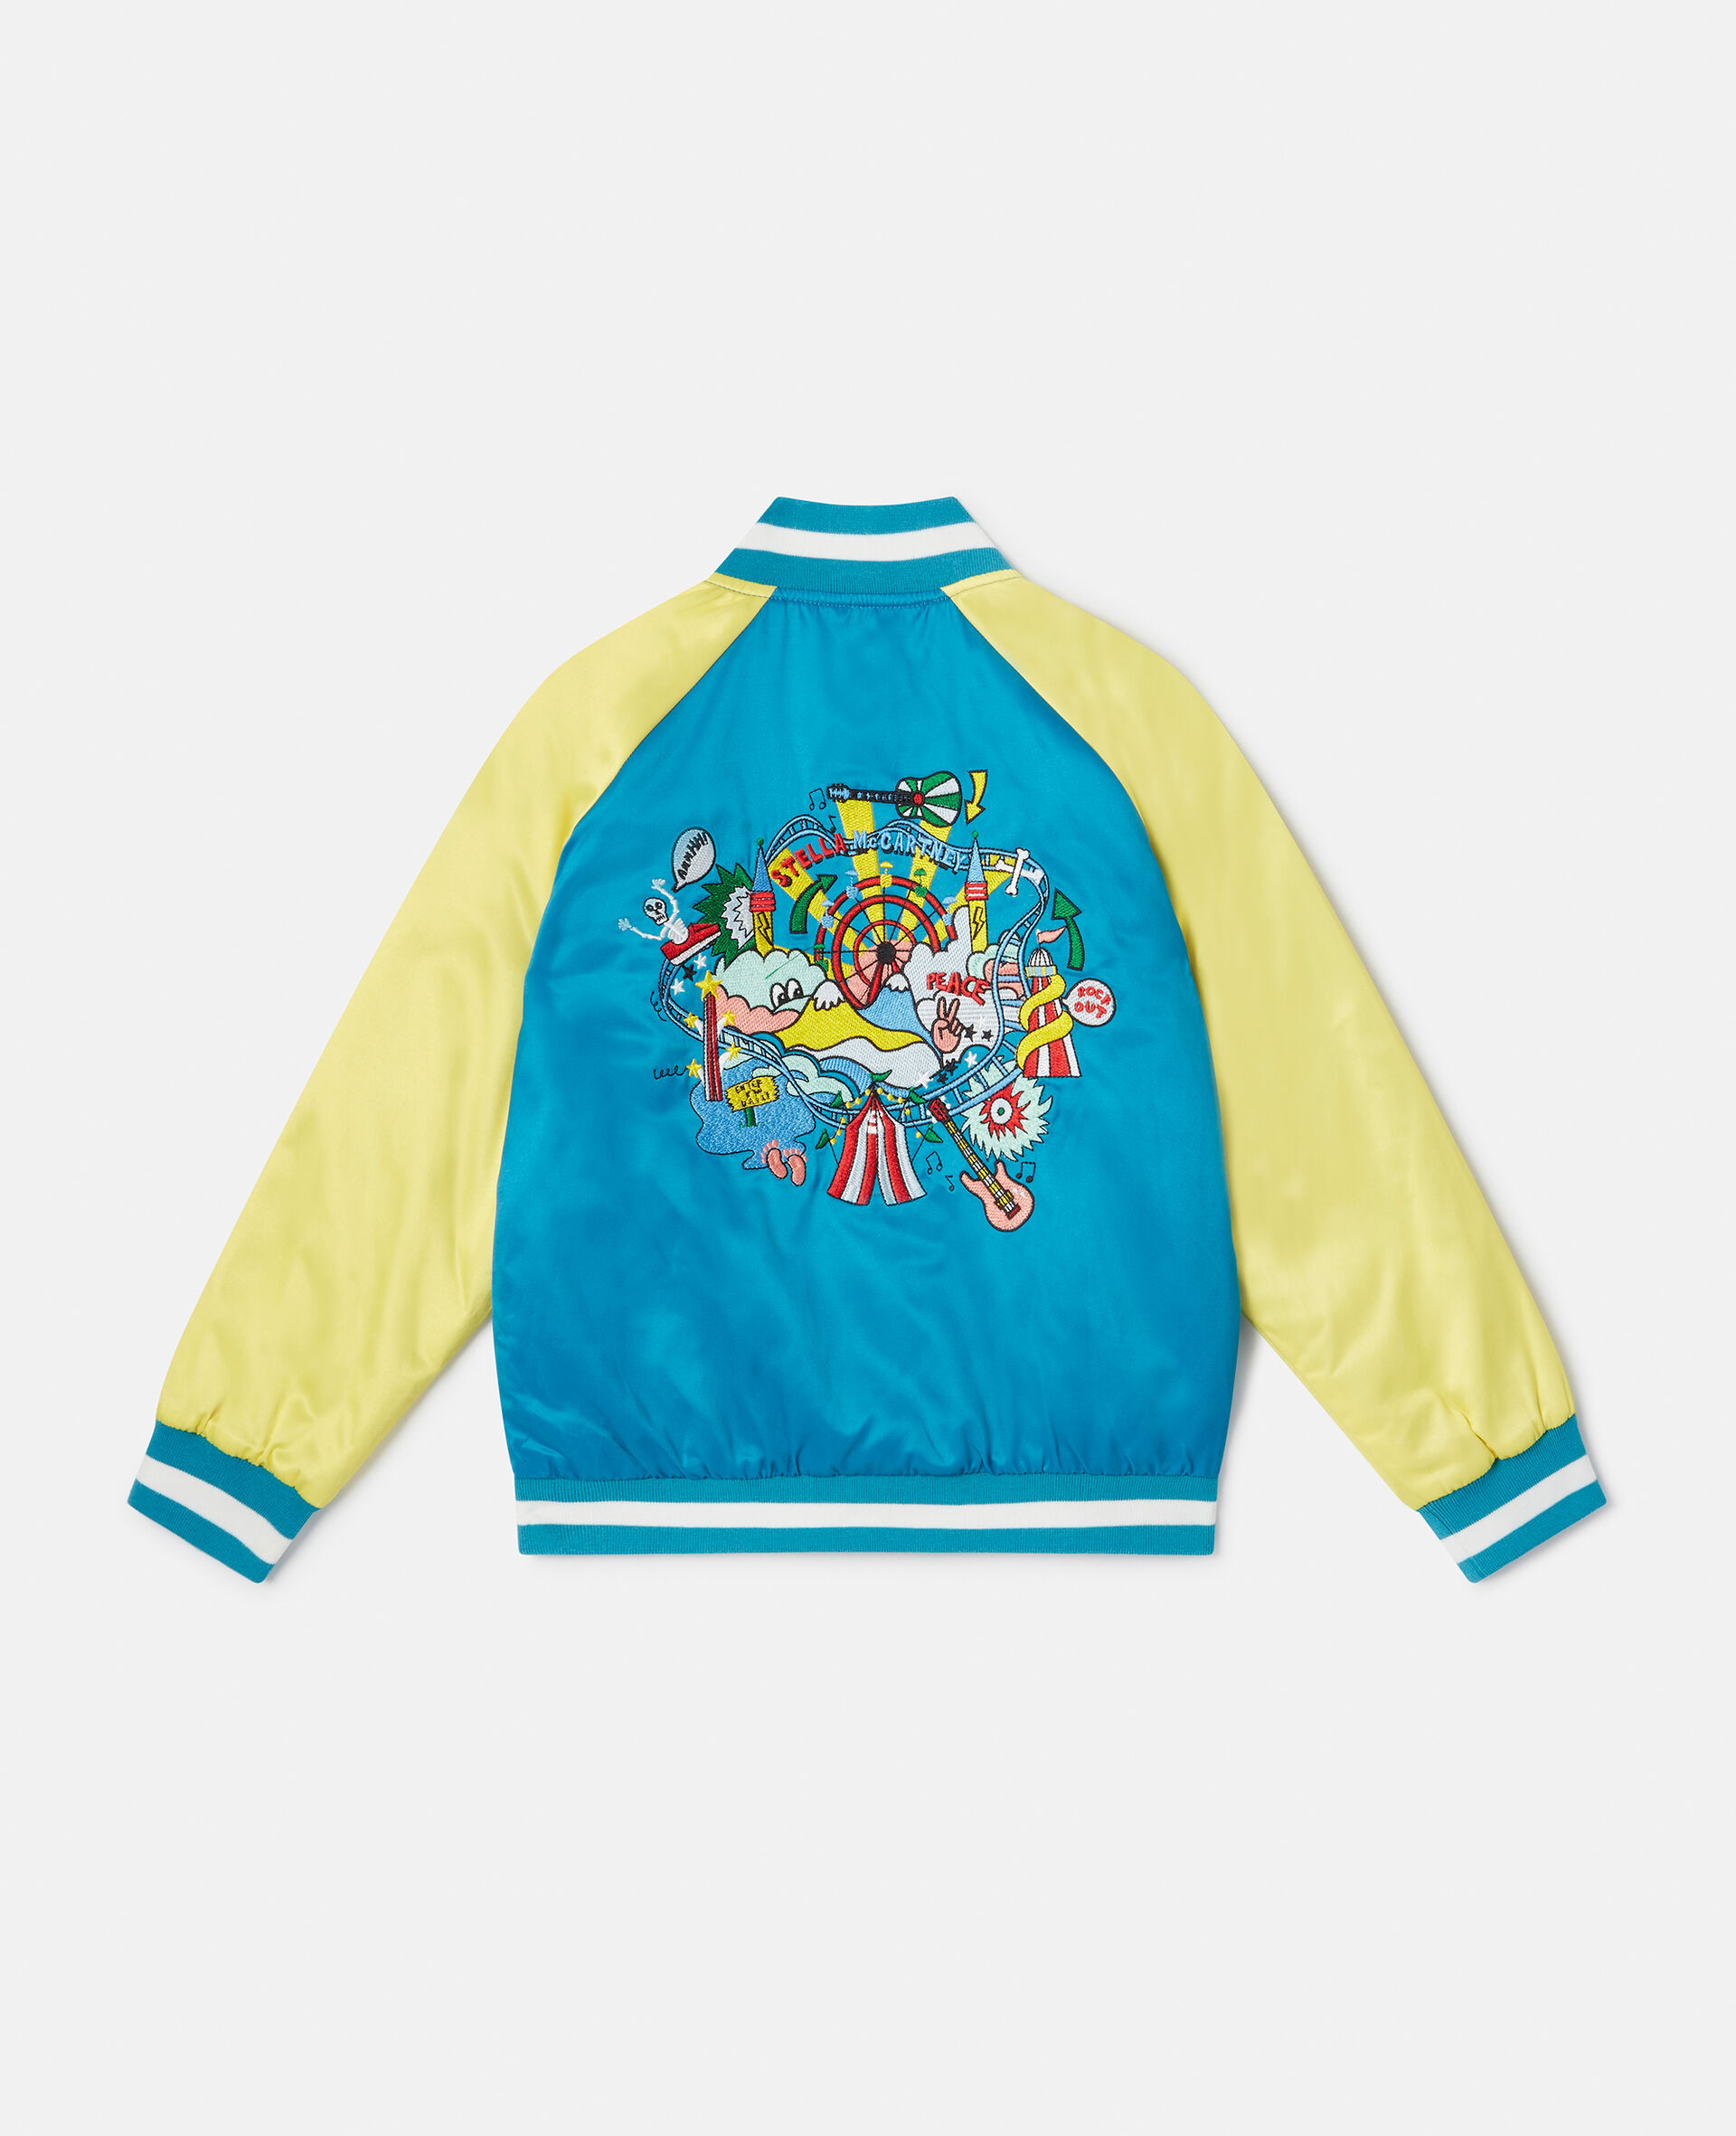 Funfair Embroidery Bomber Jacket-Yellow-large image number 2